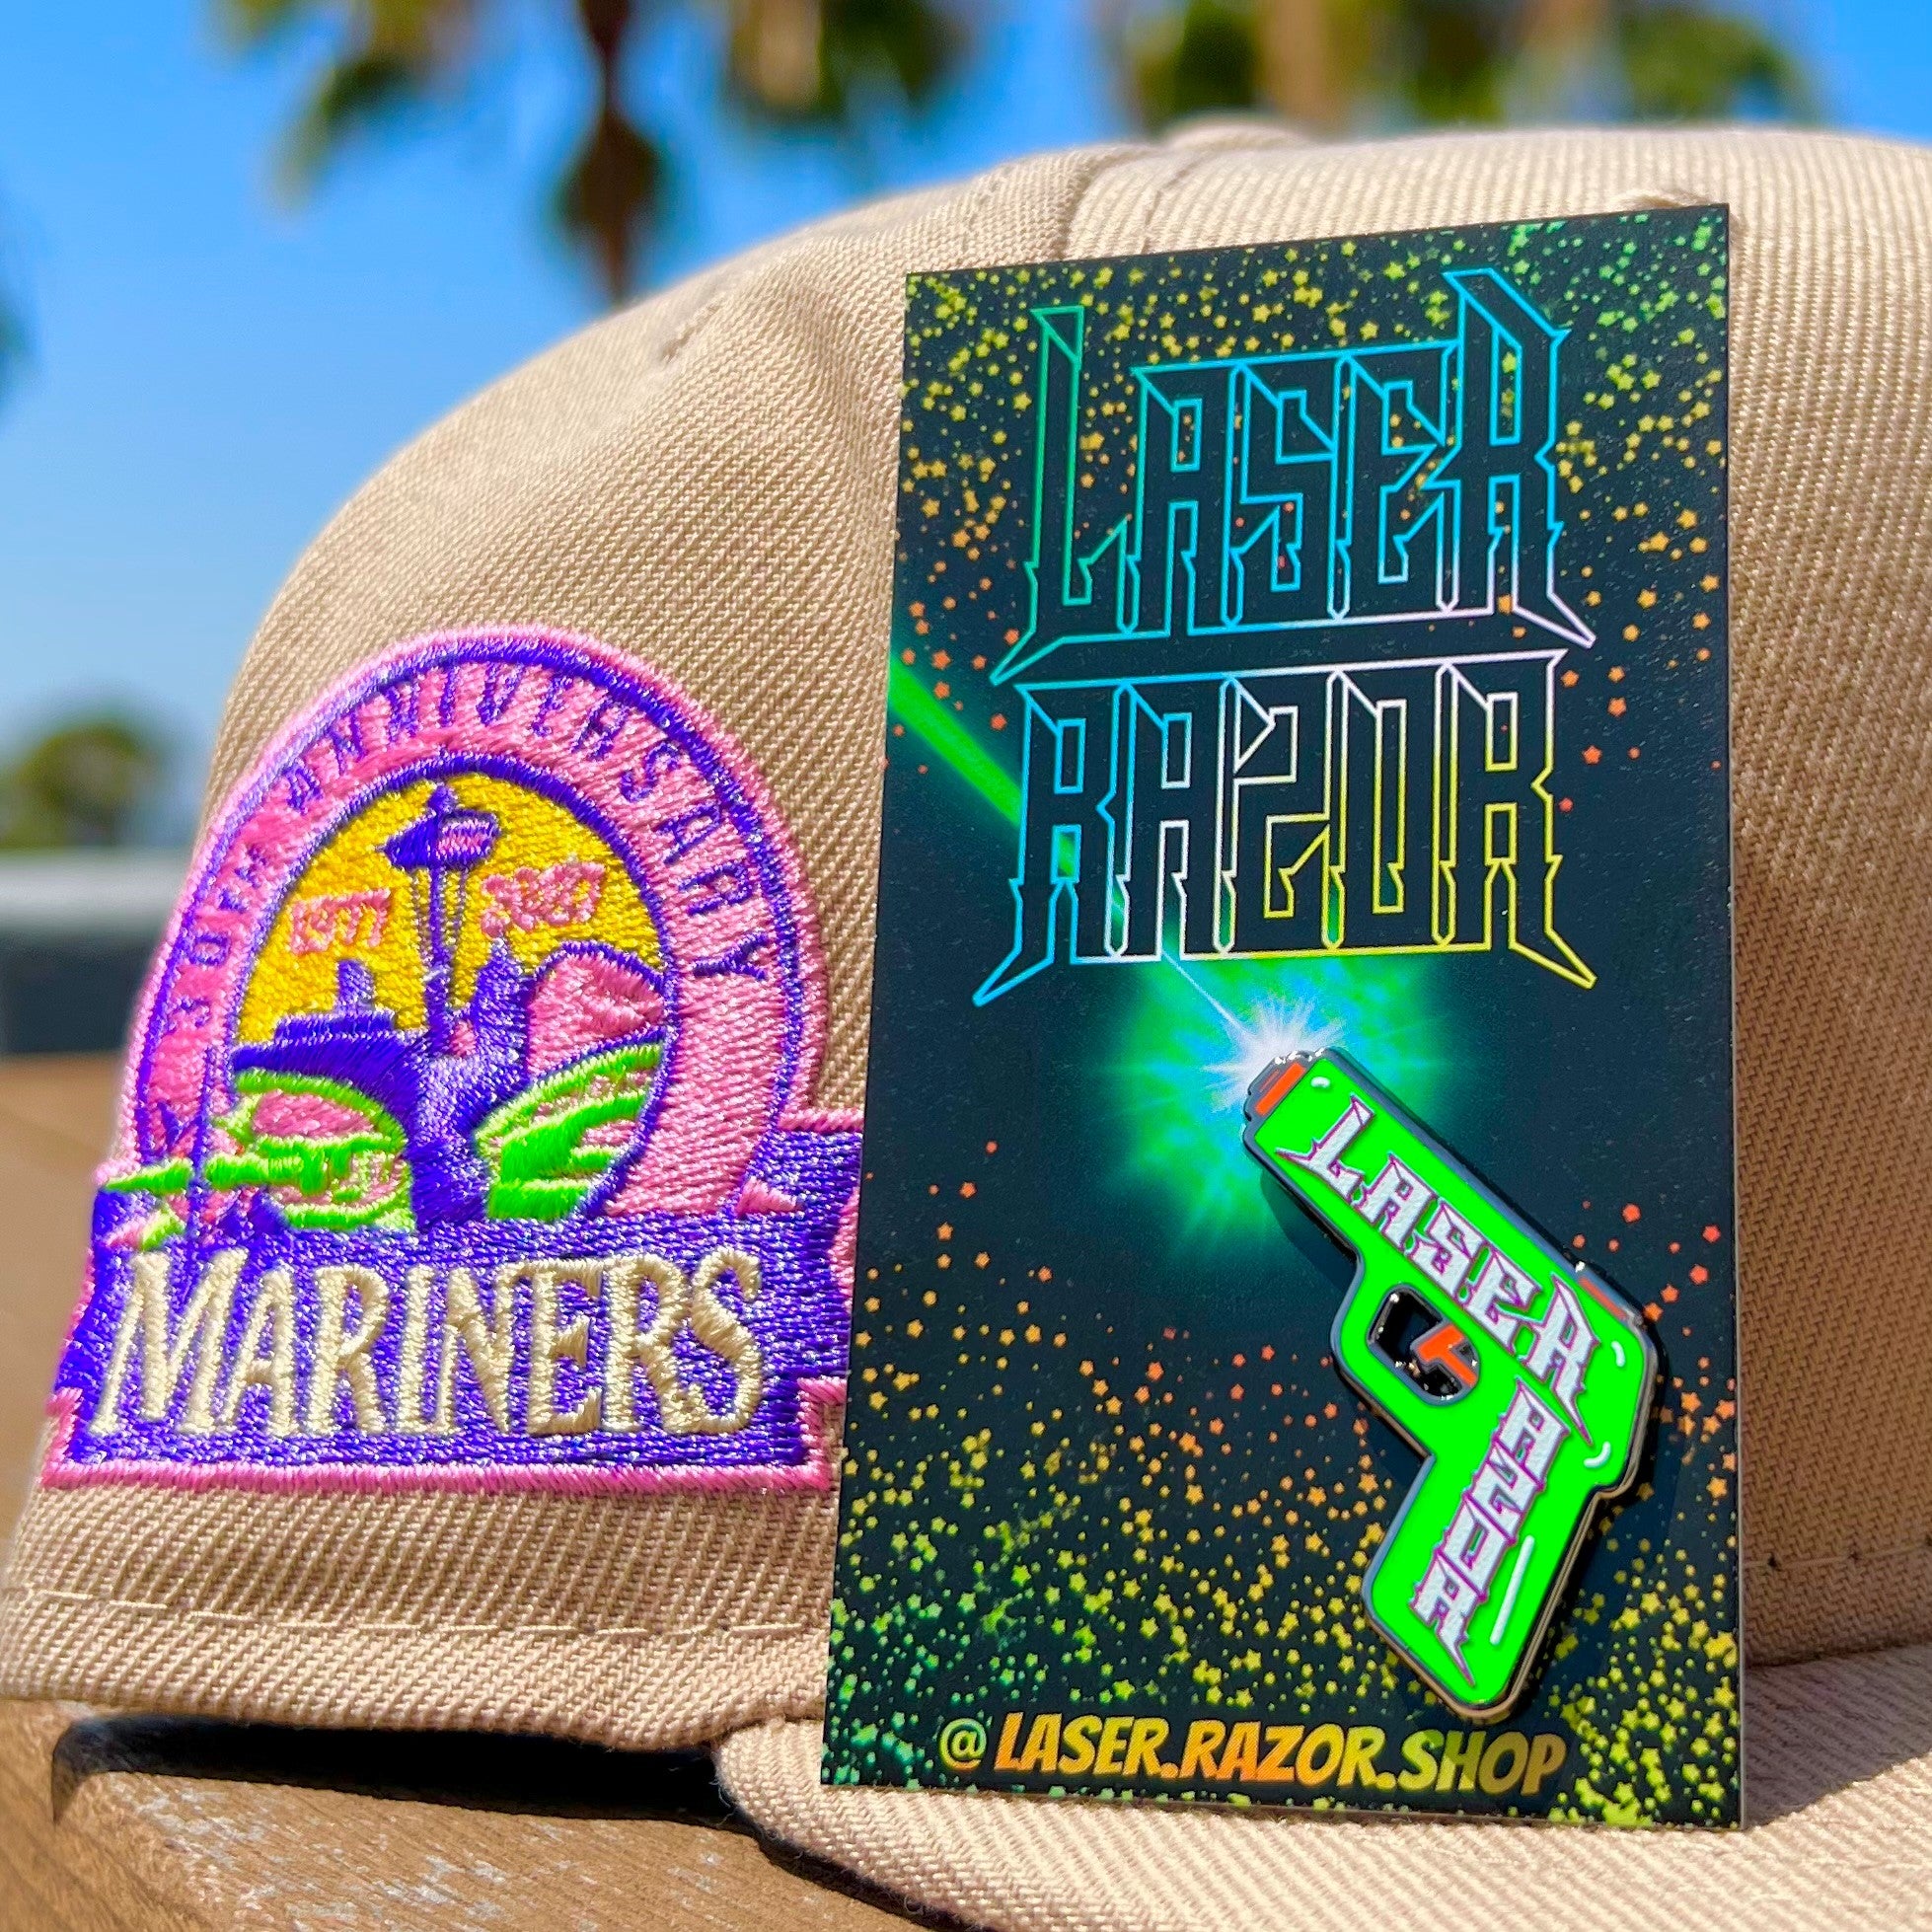 "LASERS IN THE CHAT" PIN - Laser Razor Shop